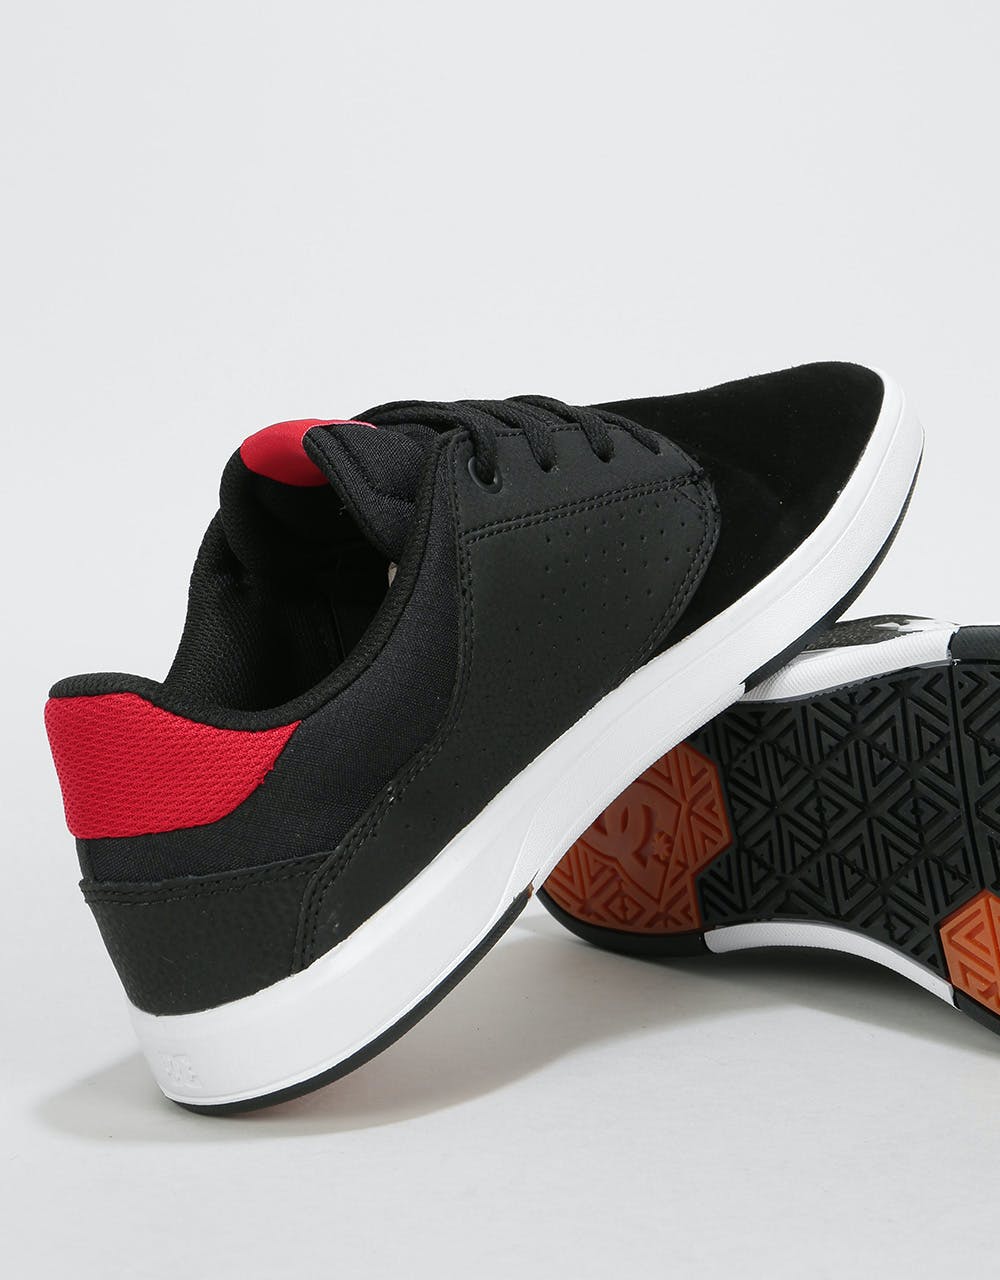 DC Plaza TCS Skate Shoes - Black/Athletic Red